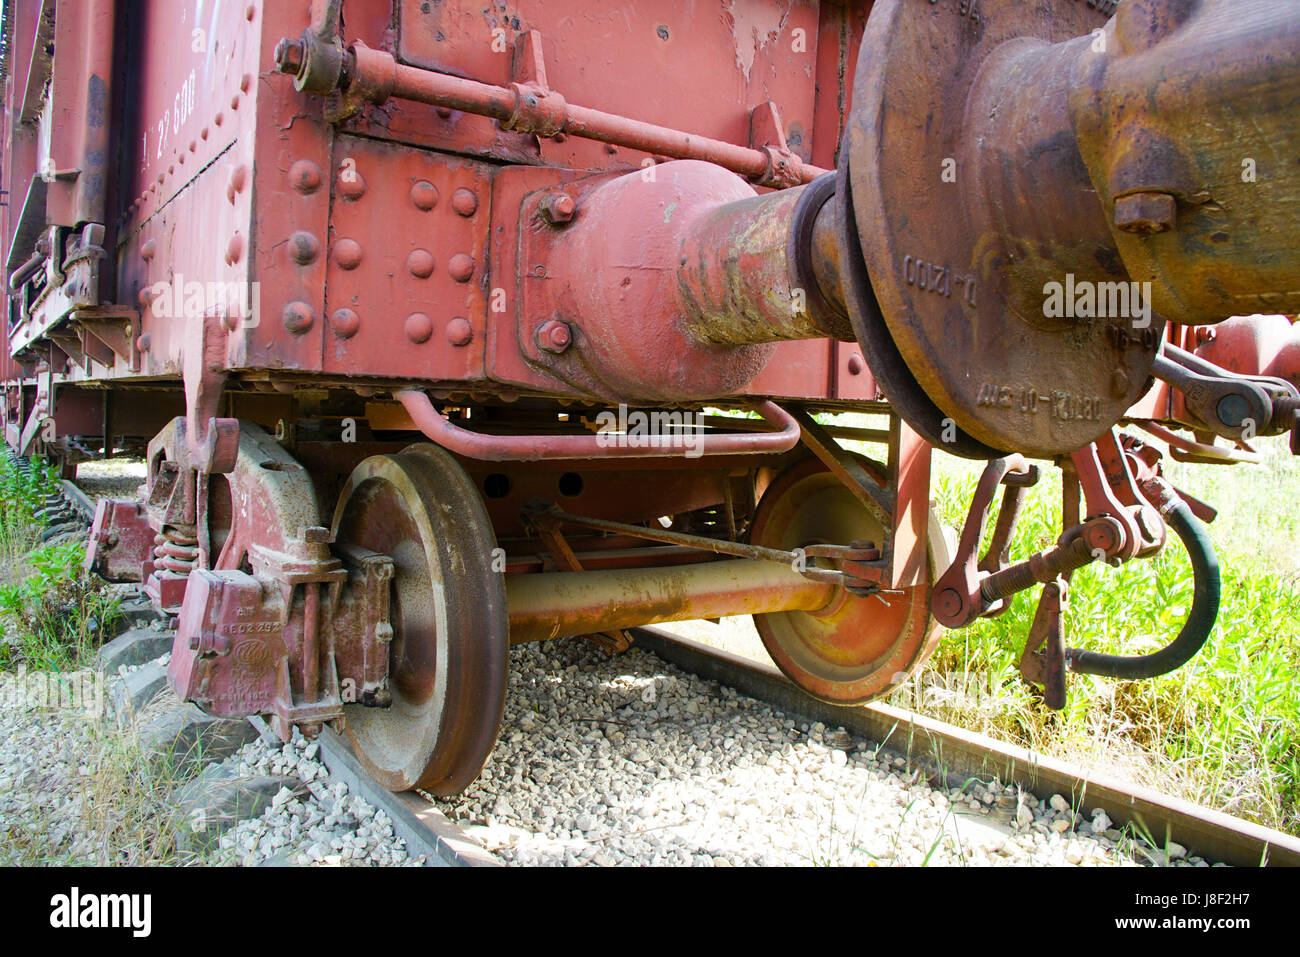 Abandoned train carriage in a disused railway yard Stock Photo